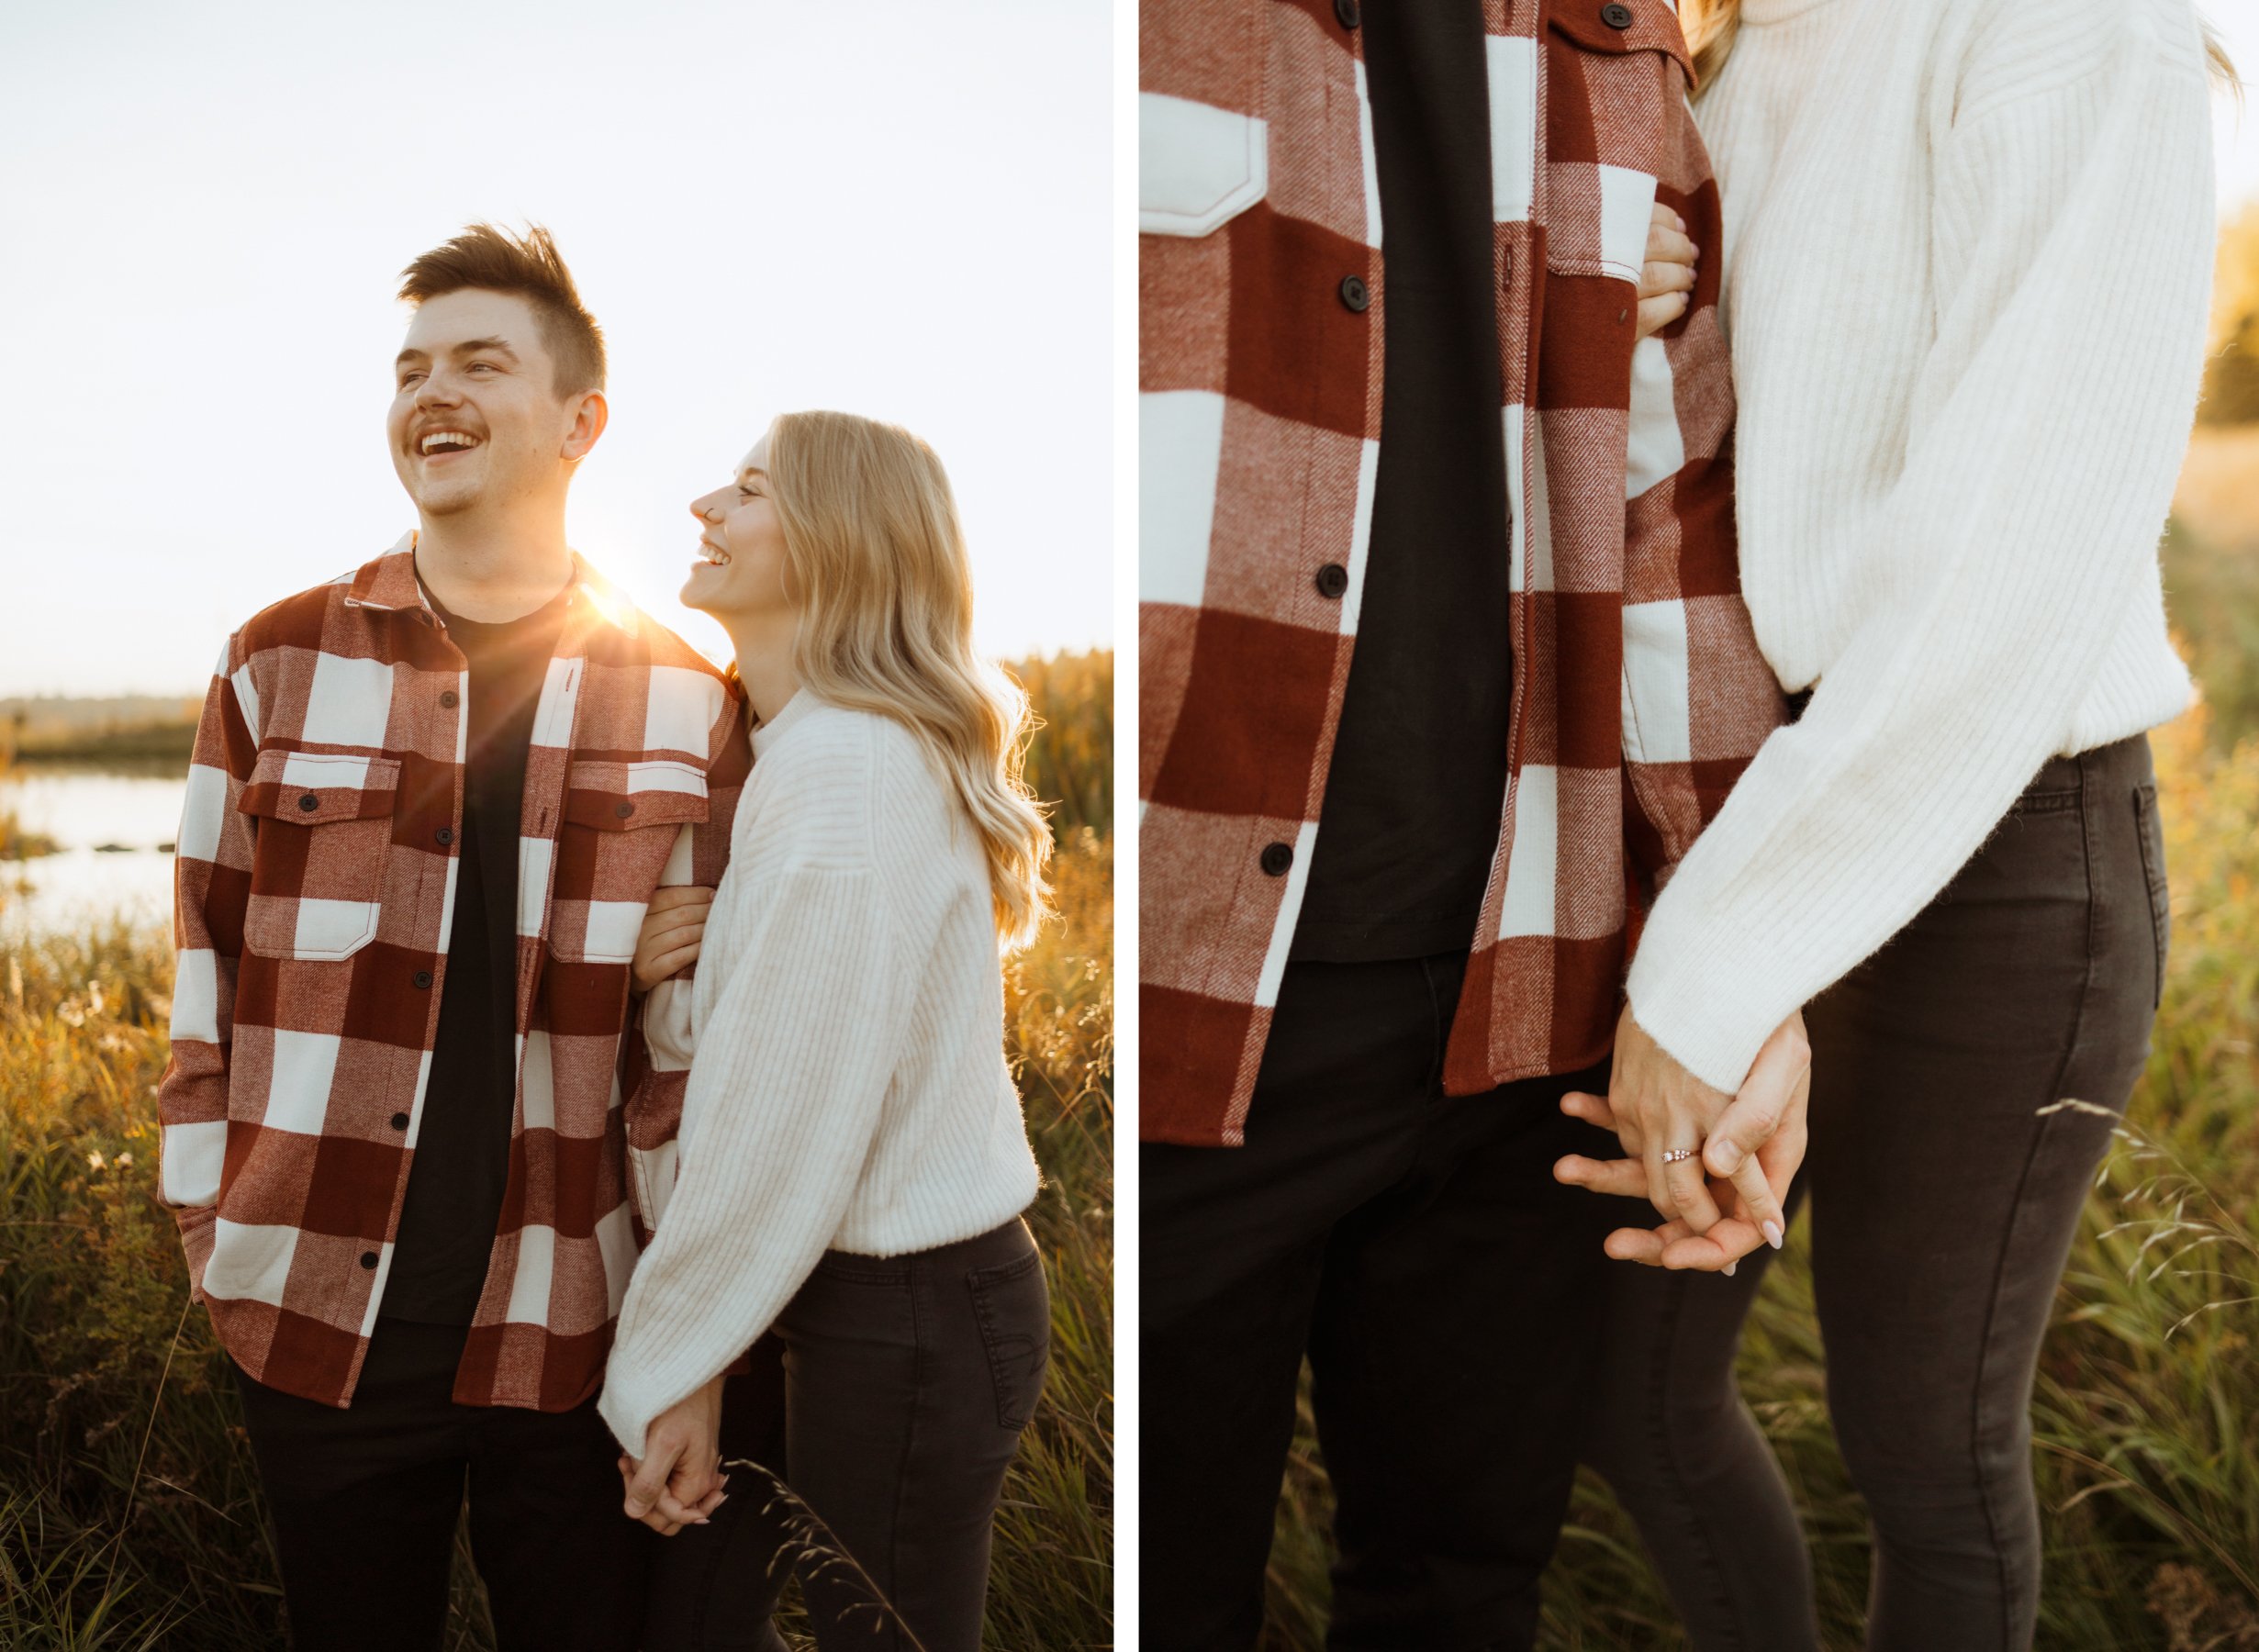 Calgary-wedding-photographer-love-and-be-loved-photography-Matthew-Kyra-Fish-Creek-Park-Fall-Engagement-Session-5.jpg